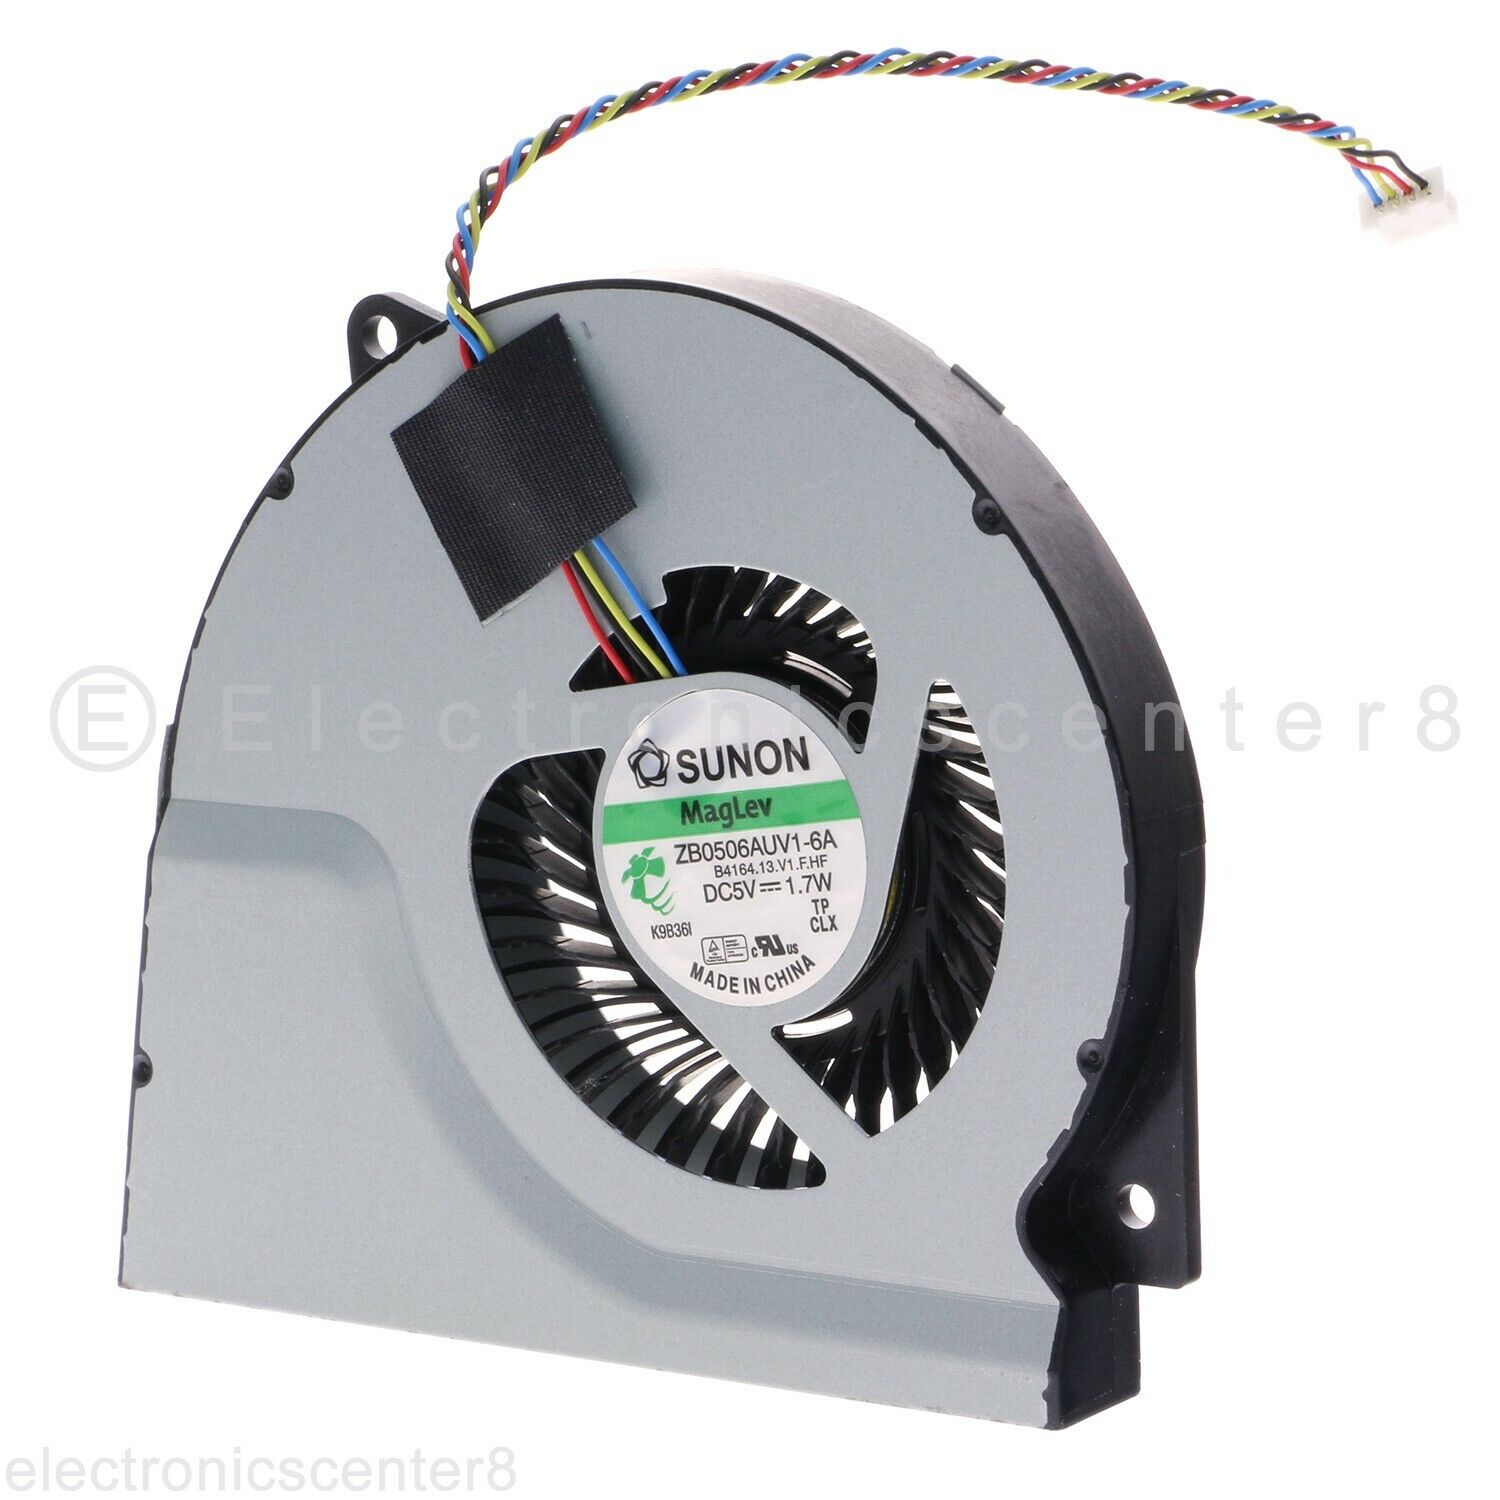 NEW CPU Cooling Fan For Dell Inspiron AIO 2350 7459 BSB0705HC CJ2B NG7F4